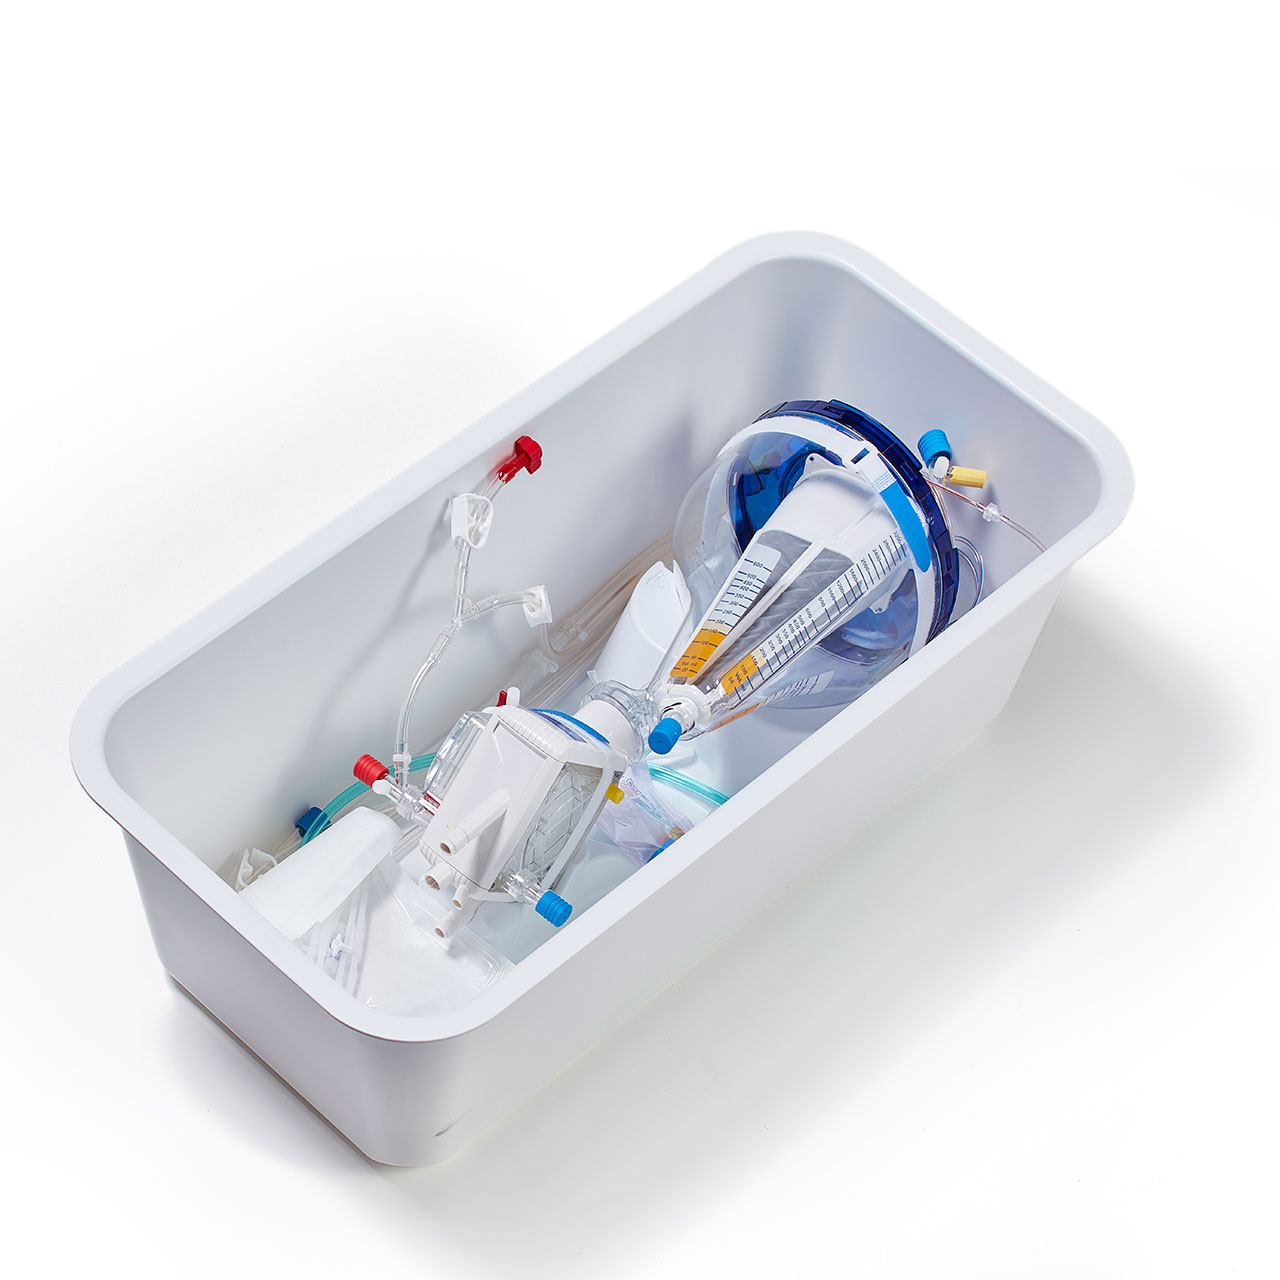 Getinge tubing sets and packaging solutions for extracorporeal circuits in surgical perfusion.